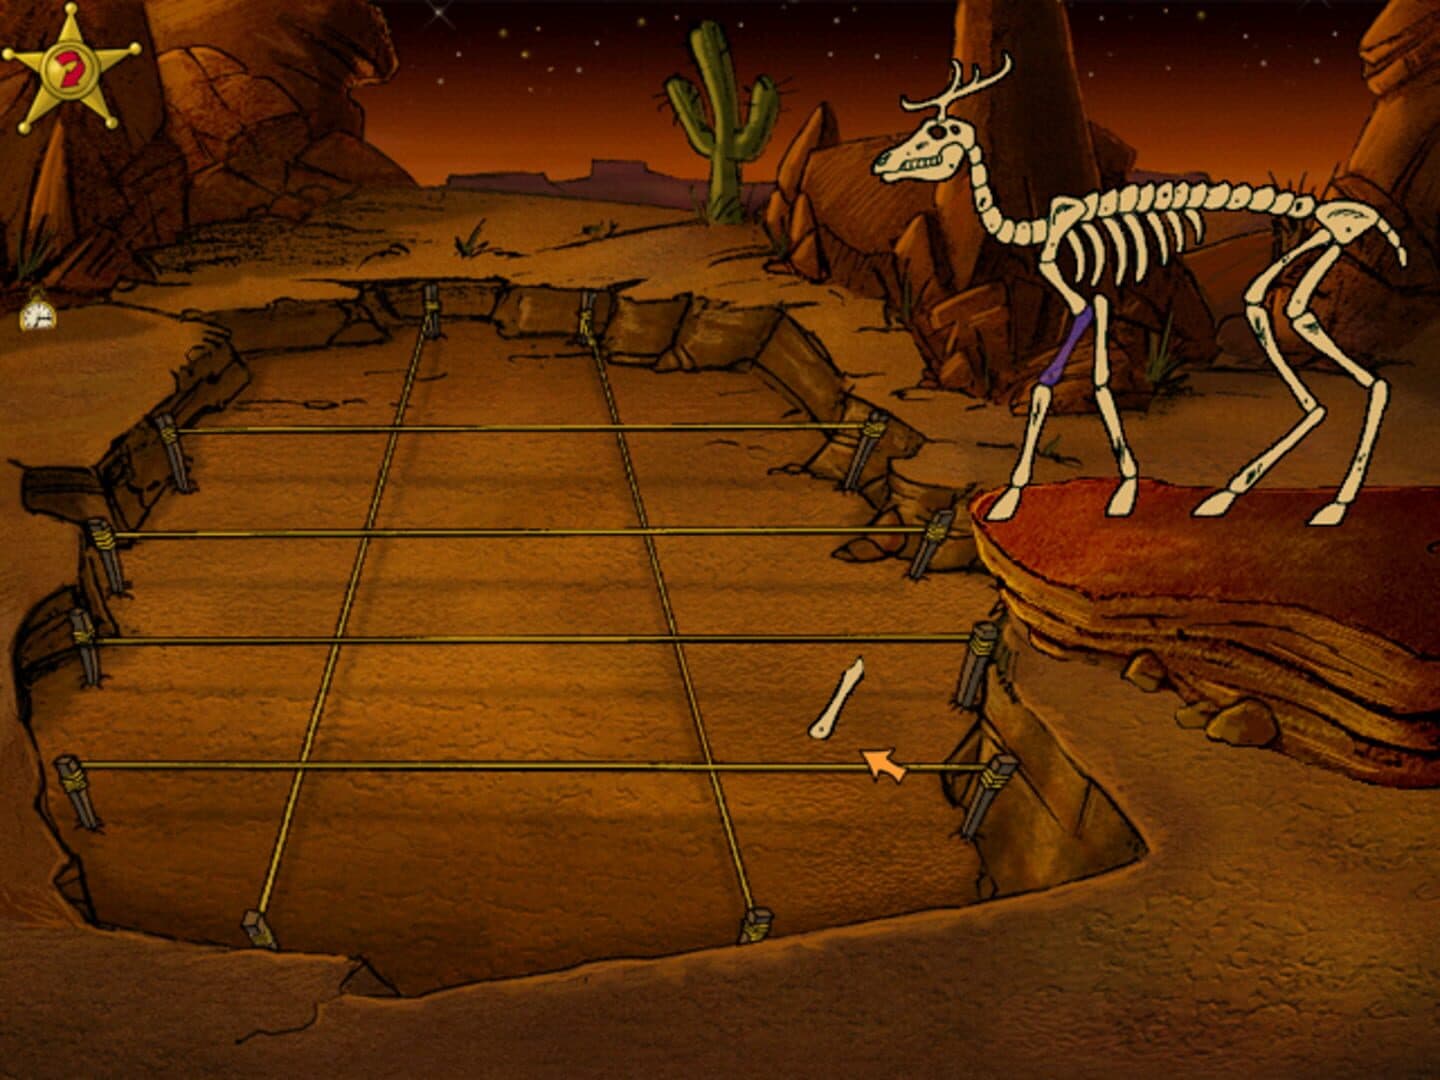 Scooby-Doo: Showdown in Ghost Town Image